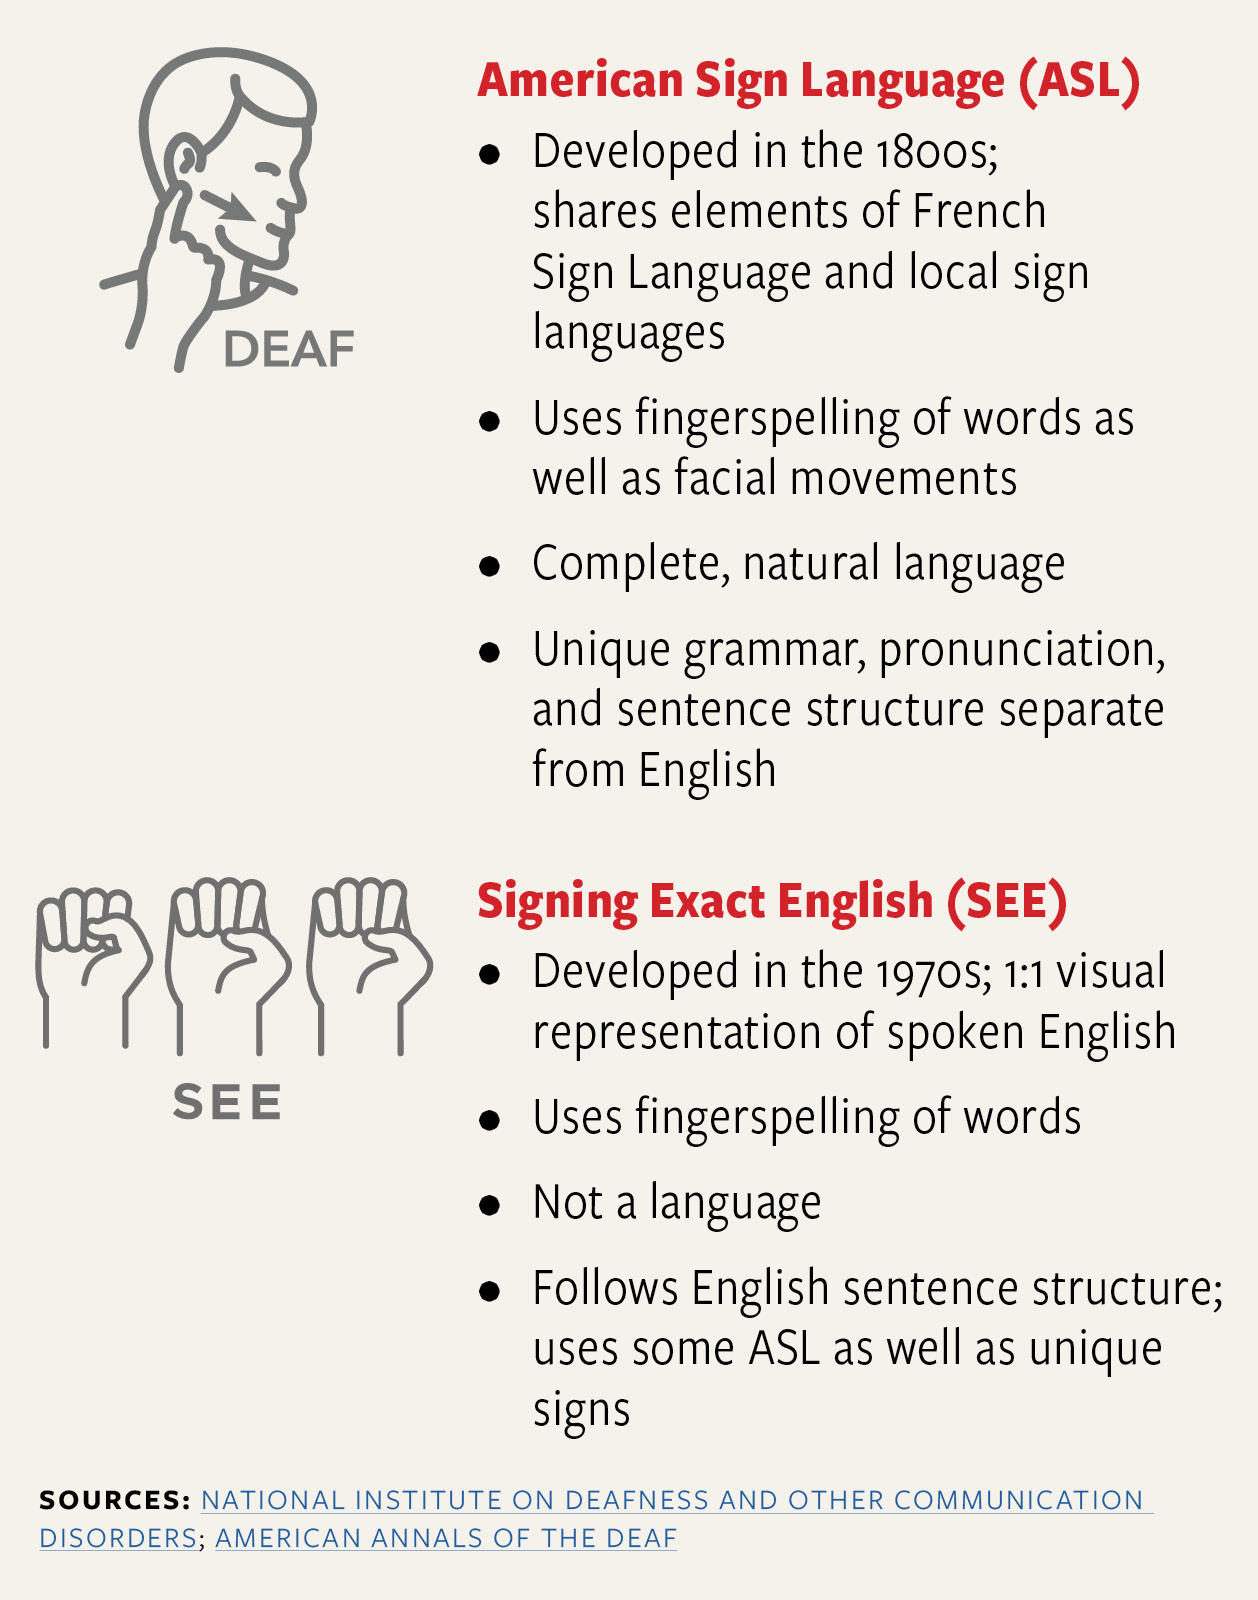 American Sign Language (ASL): Developed in the 1800s; shares elements of French Sign Language and local sign 
languages; uses fingerspelling of words as well as facial movements; complete, natural language; unique grammar, pronunciation, 
and sentence structure separate from English. Signing Exact English (SEE): Developed in the 1970s; 1:1 visual representation of spoken English; uses fingerspelling of words; not a language; follows English sentence structure; uses some ASL as well as unique signs. Sources: National Institute on Deafness and Other Communication Disorders; American Annals of the Deaf